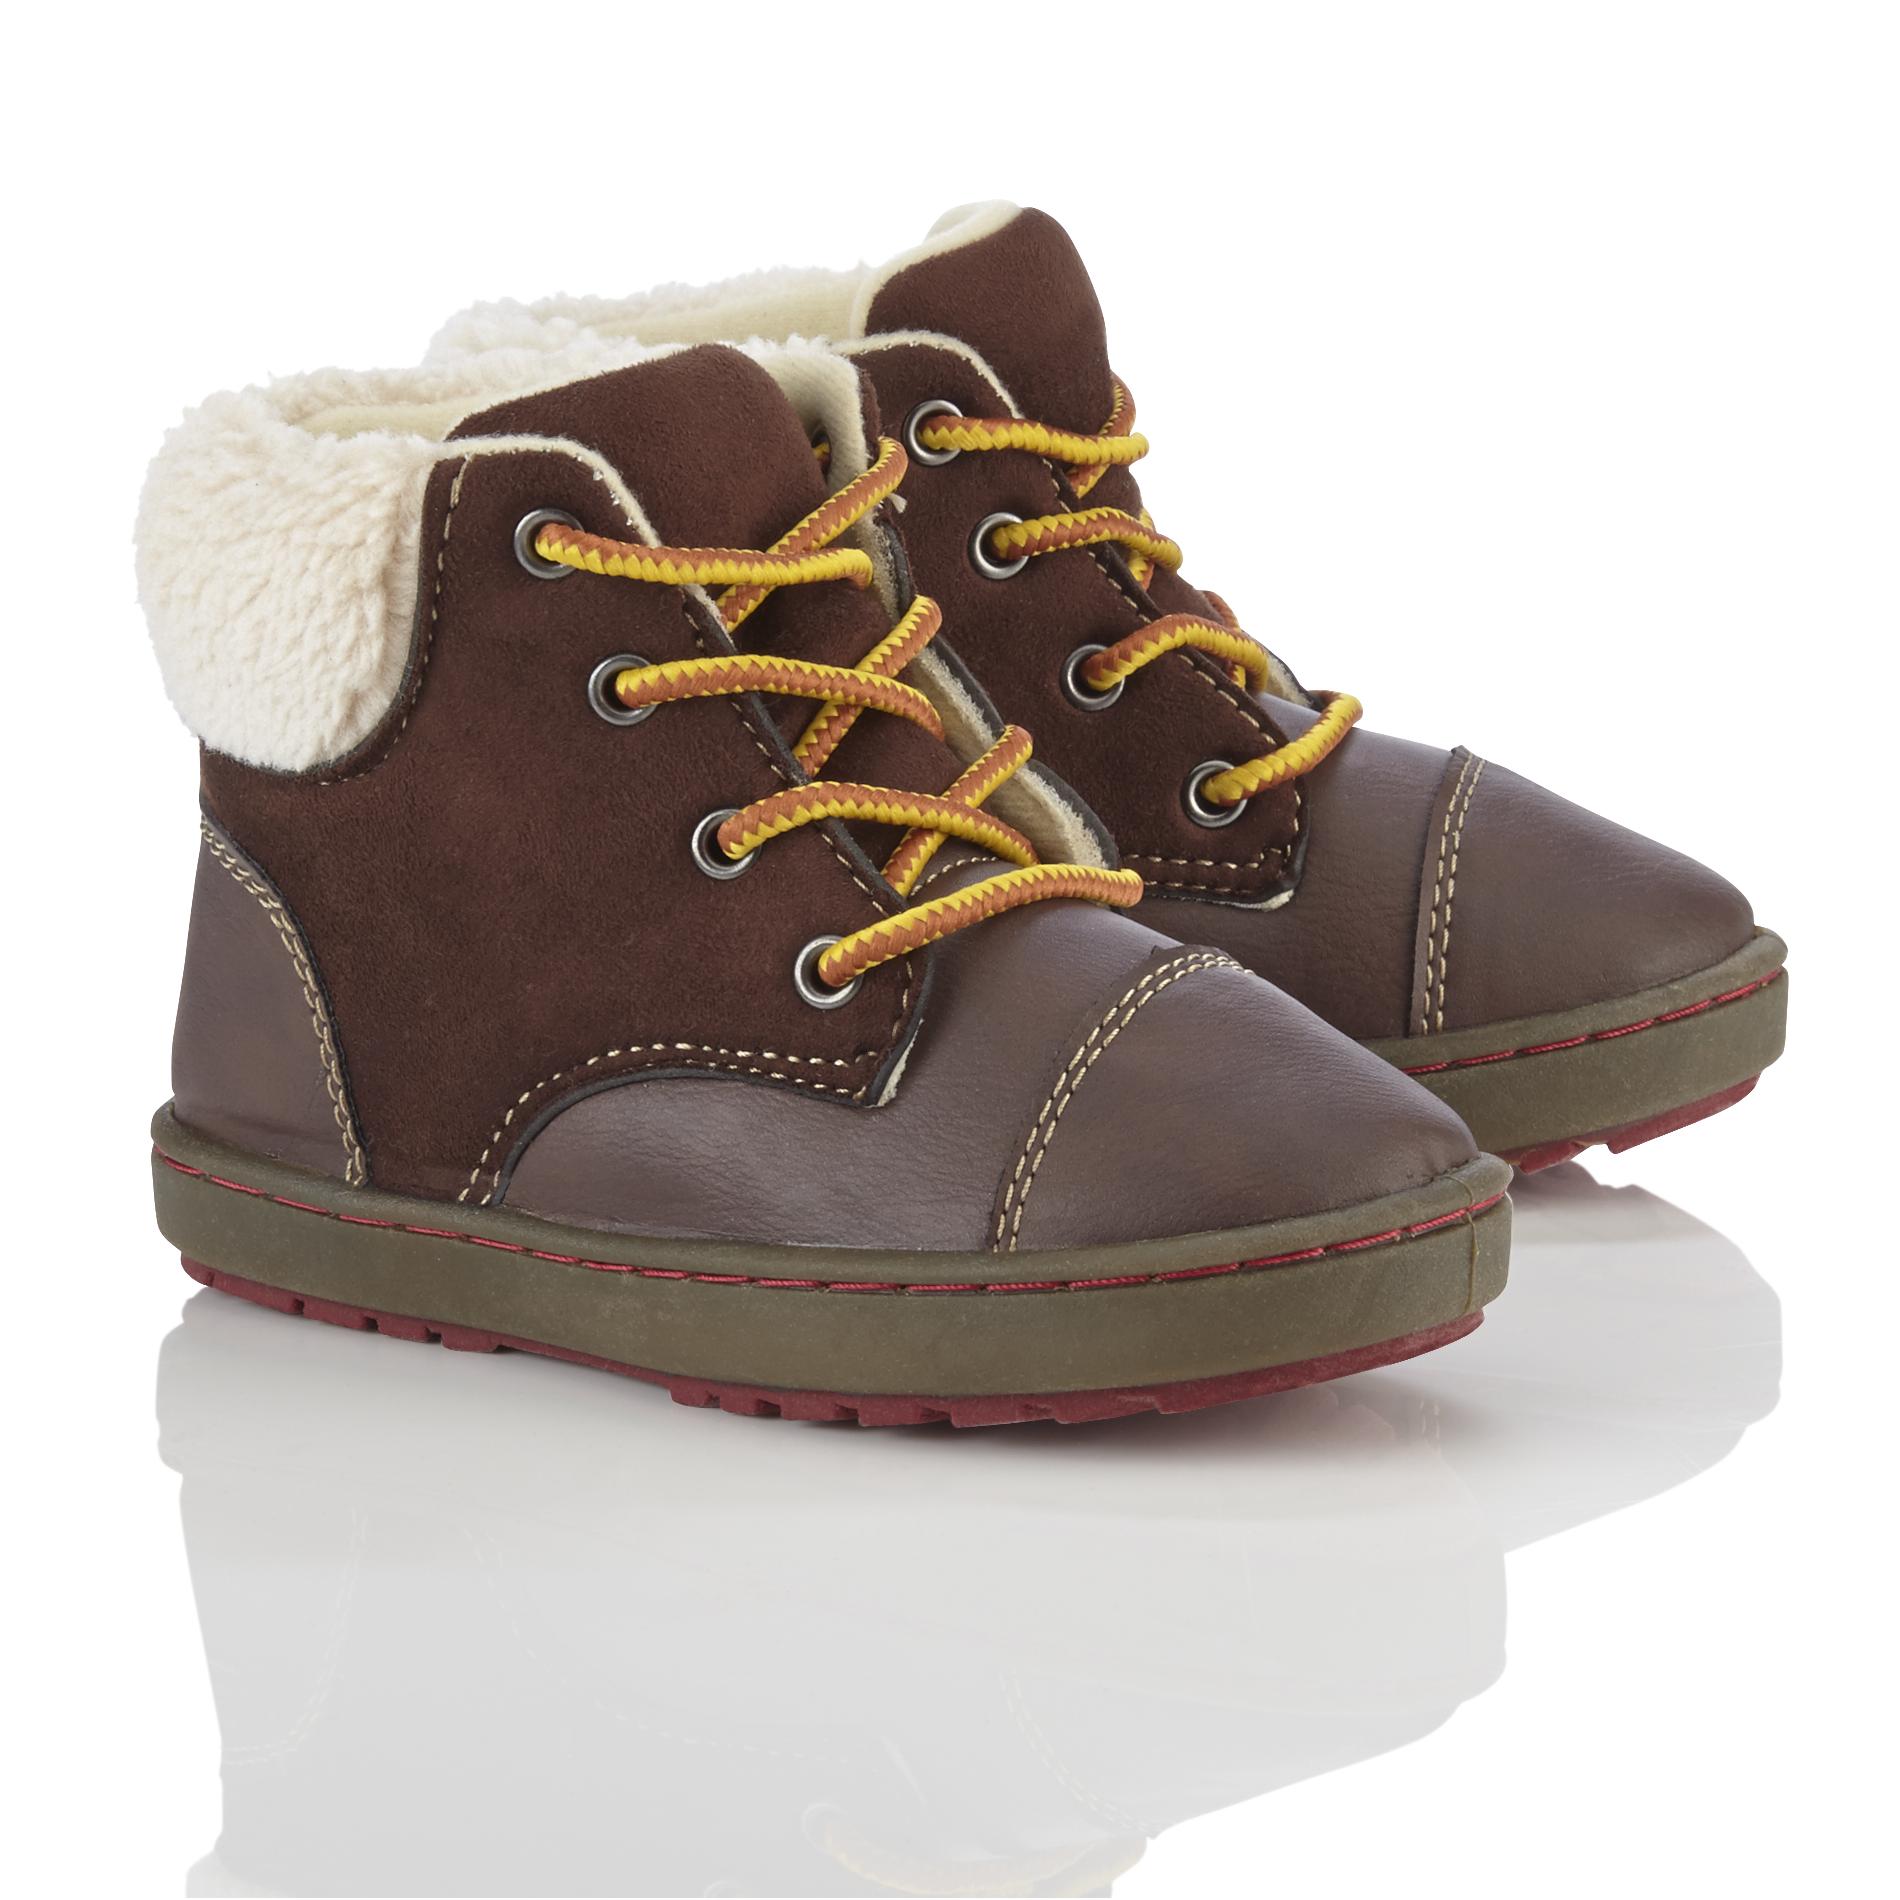 UPC 888737000025 product image for Toddler Boy's Eddy Brown Winter Boot | upcitemdb.com